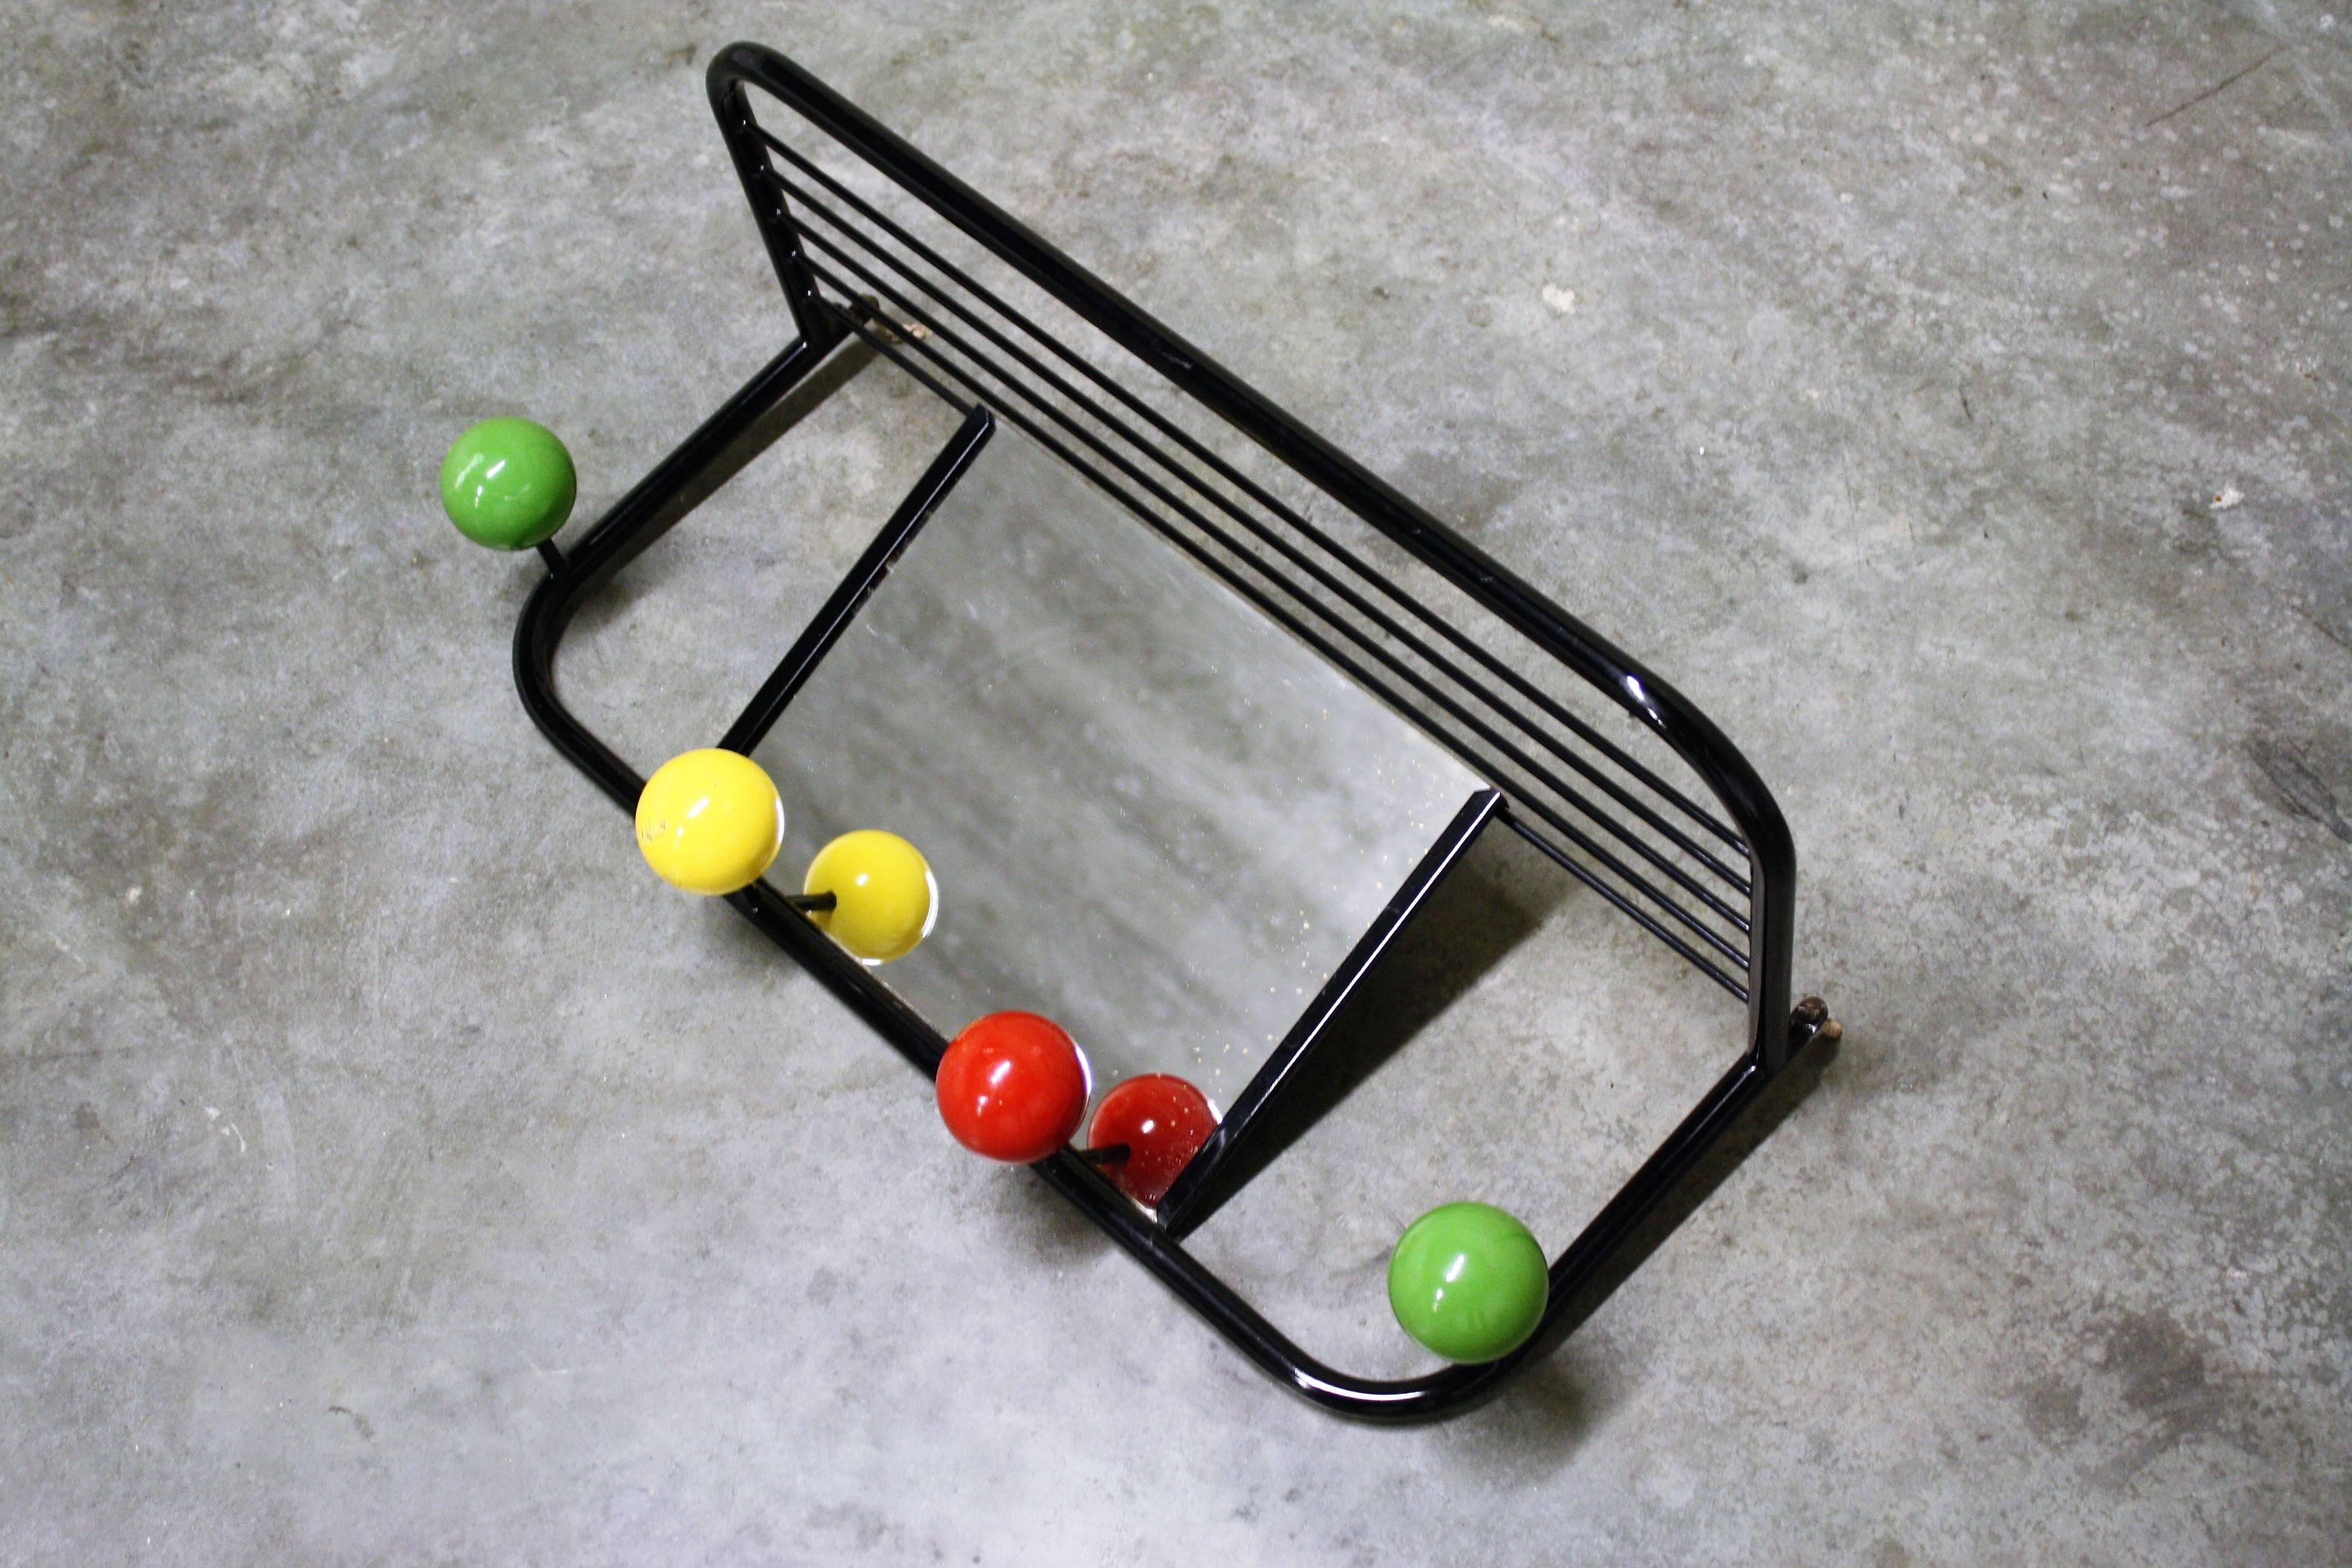 Vintage atomic coat rack in the style of Roger Feraud.

The typical Space Age atomic design still looks modern today.

It consists of a mirror, four coloured wooden balls and a tray that serves for hats or other attributes.

Lovely add-on for